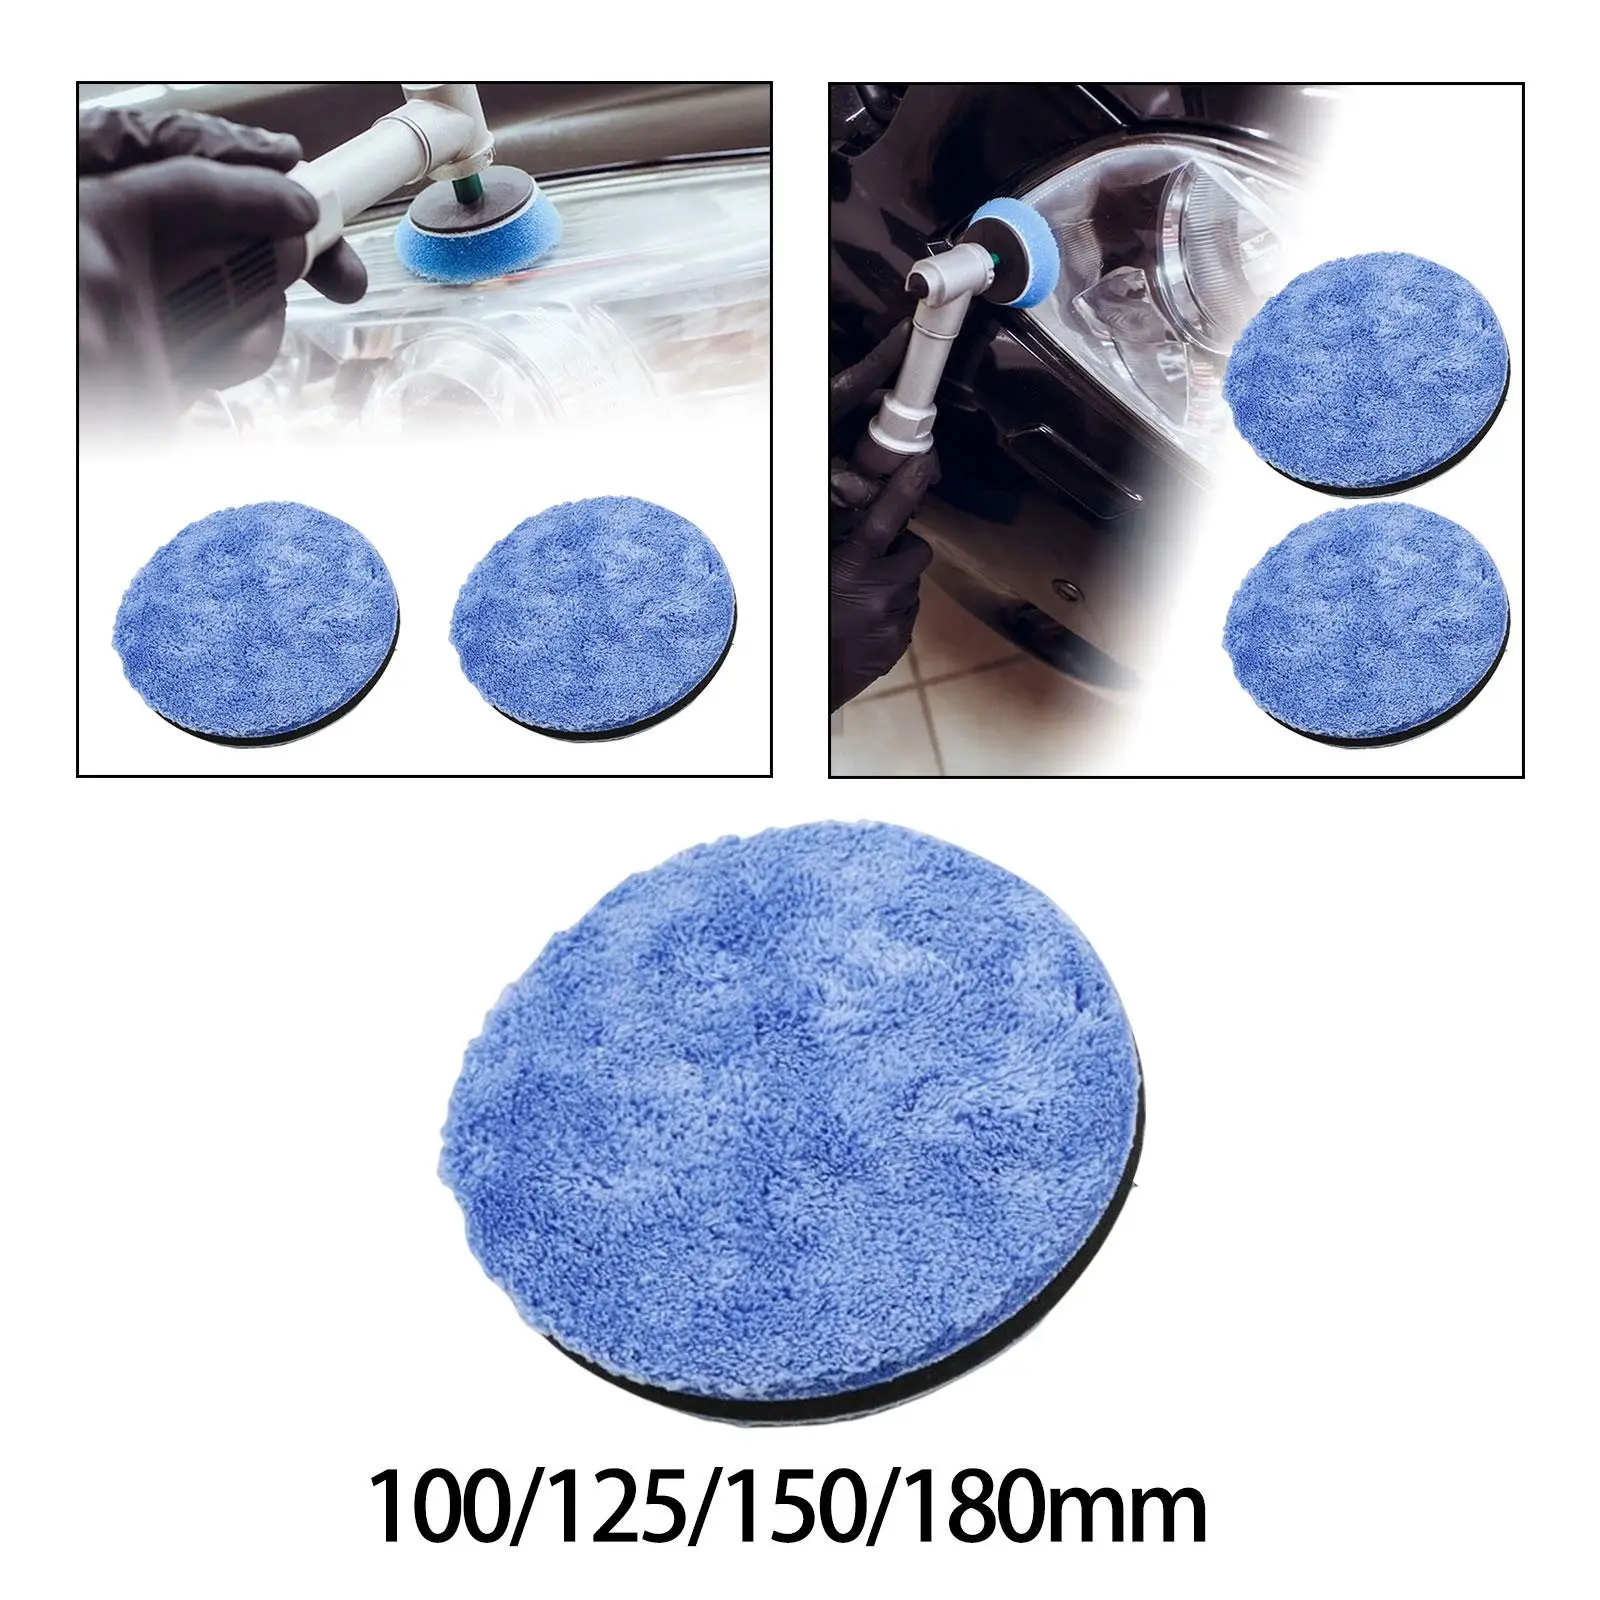 Microfiber Polishing Pad Multifunctional Soft Blue Waxing Sponge for Auto Tool Car Interior Exterior Cleaning Boats